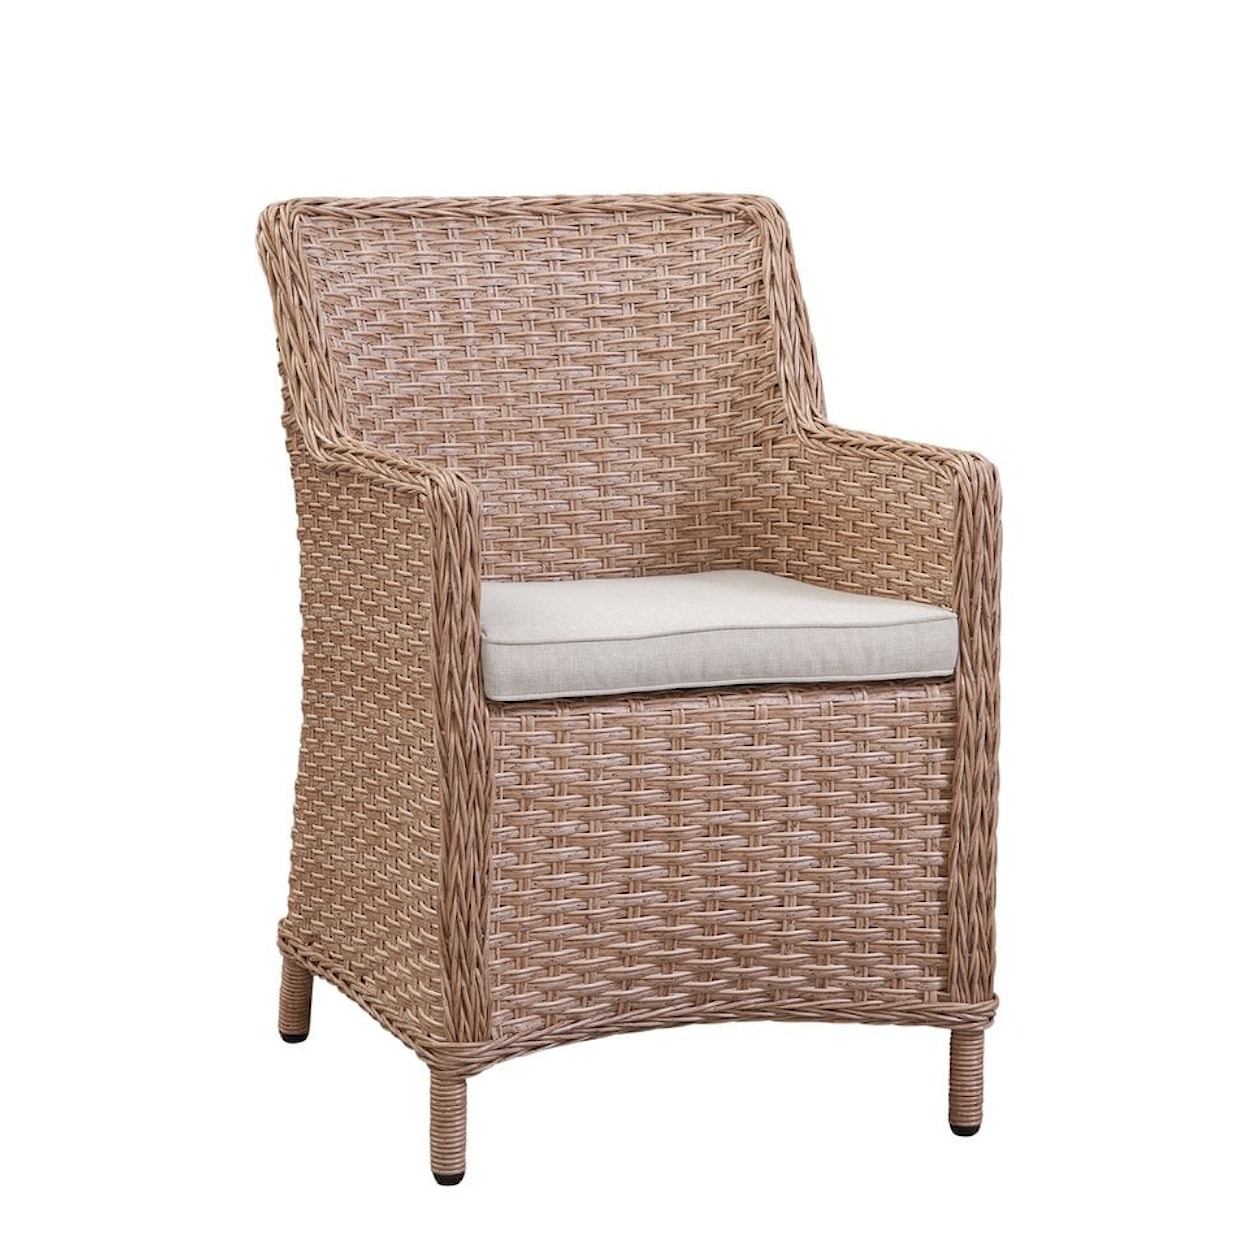 John Thomas Parks: Outdoor Living Biscaynee Dining Chair